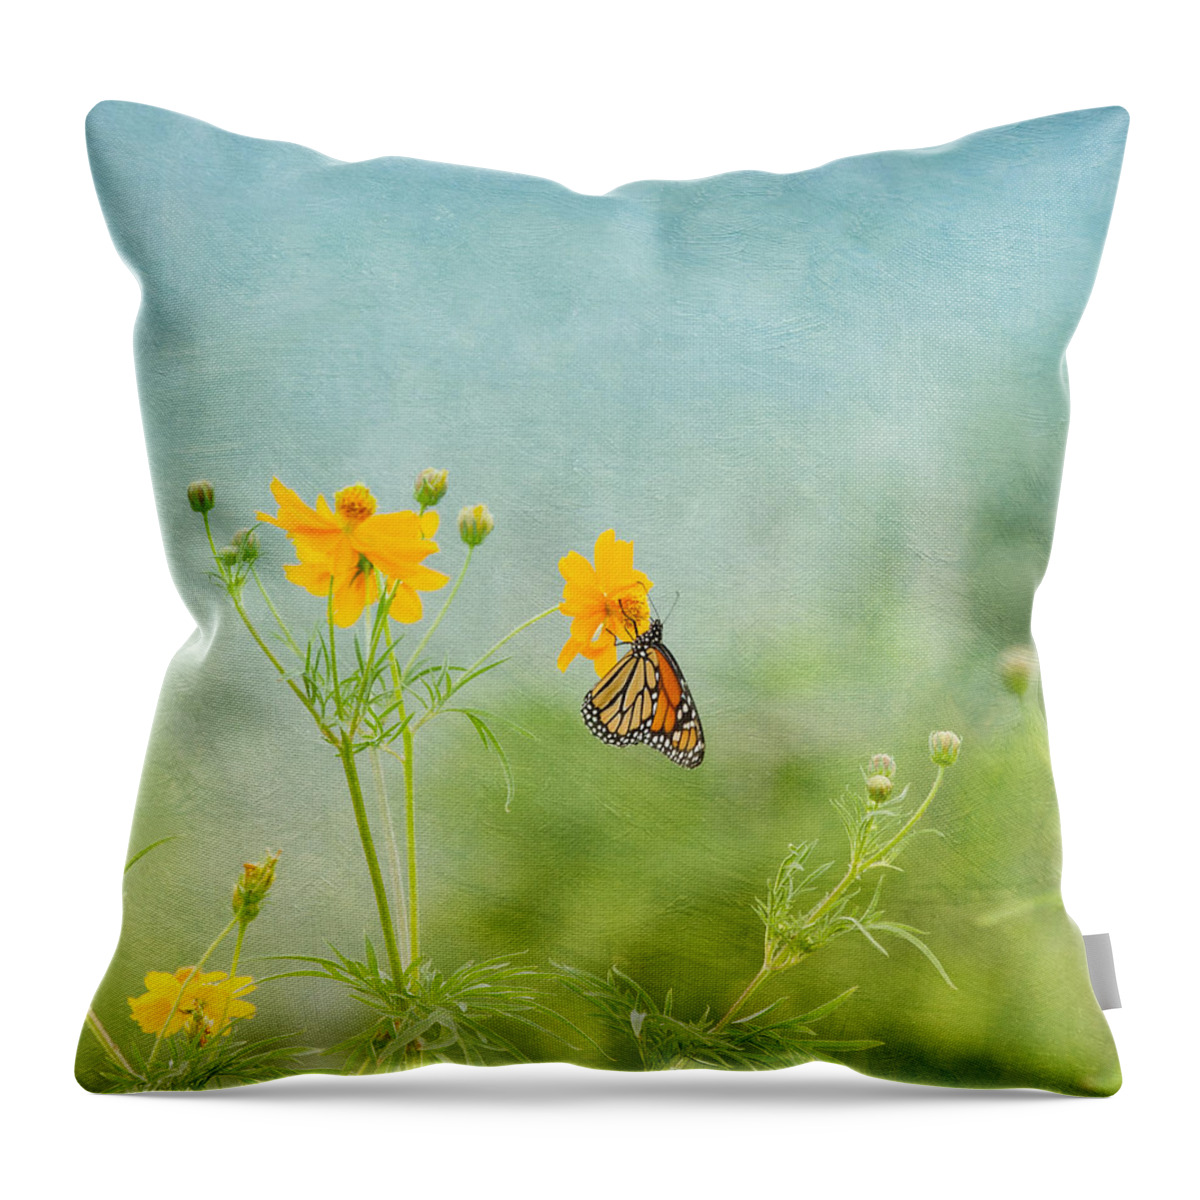 Nature Throw Pillow featuring the photograph In The Garden - Monarch Butterfly by Kim Hojnacki